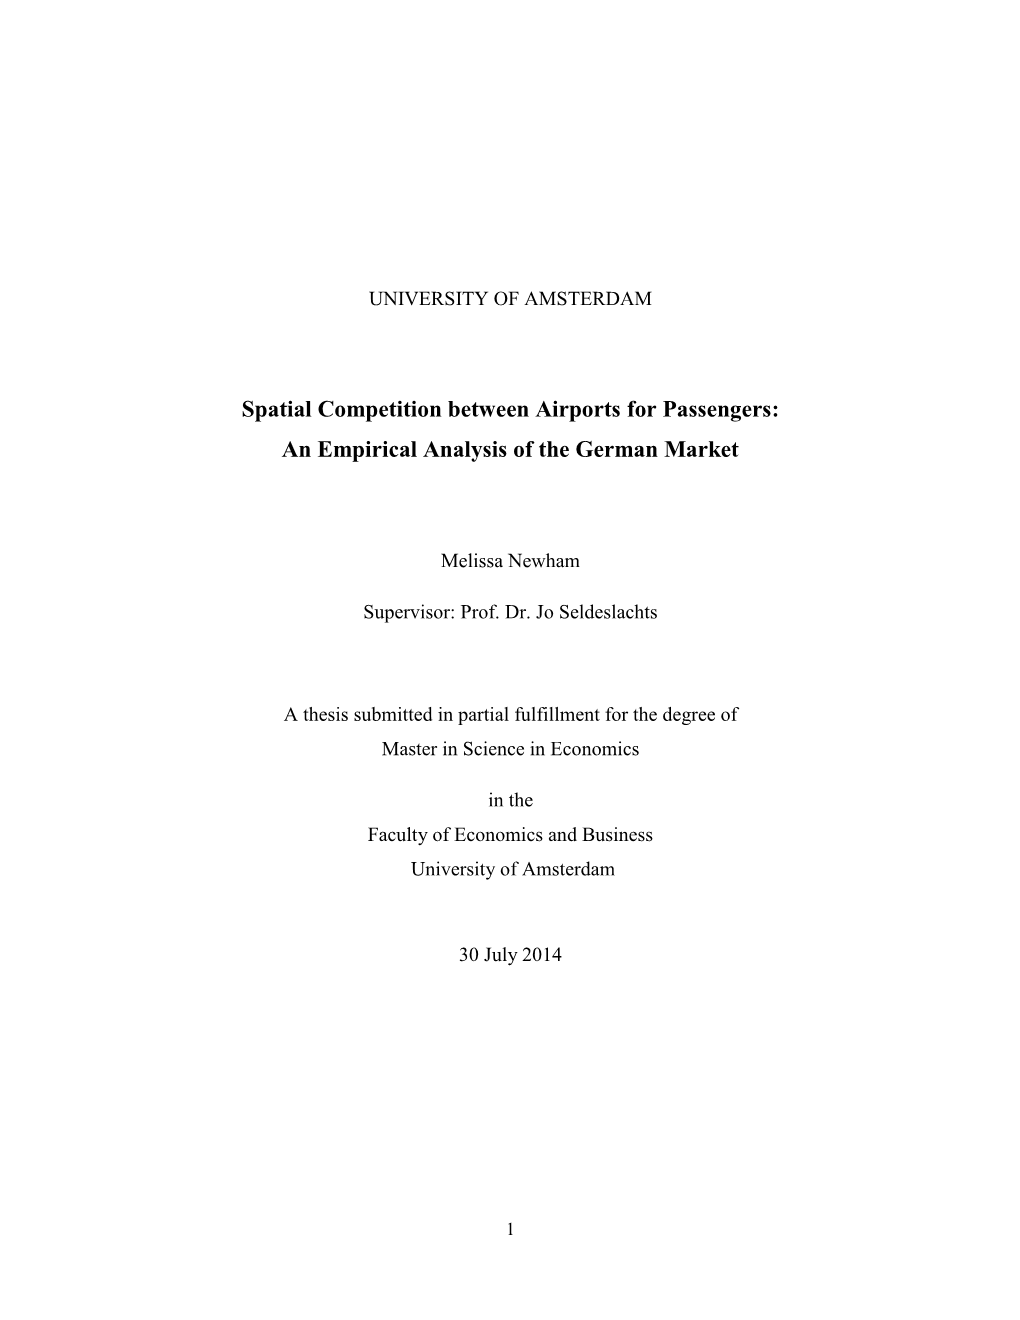 Spatial Competition Between Airports for Passengers: an Empirical Analysis of the German Market